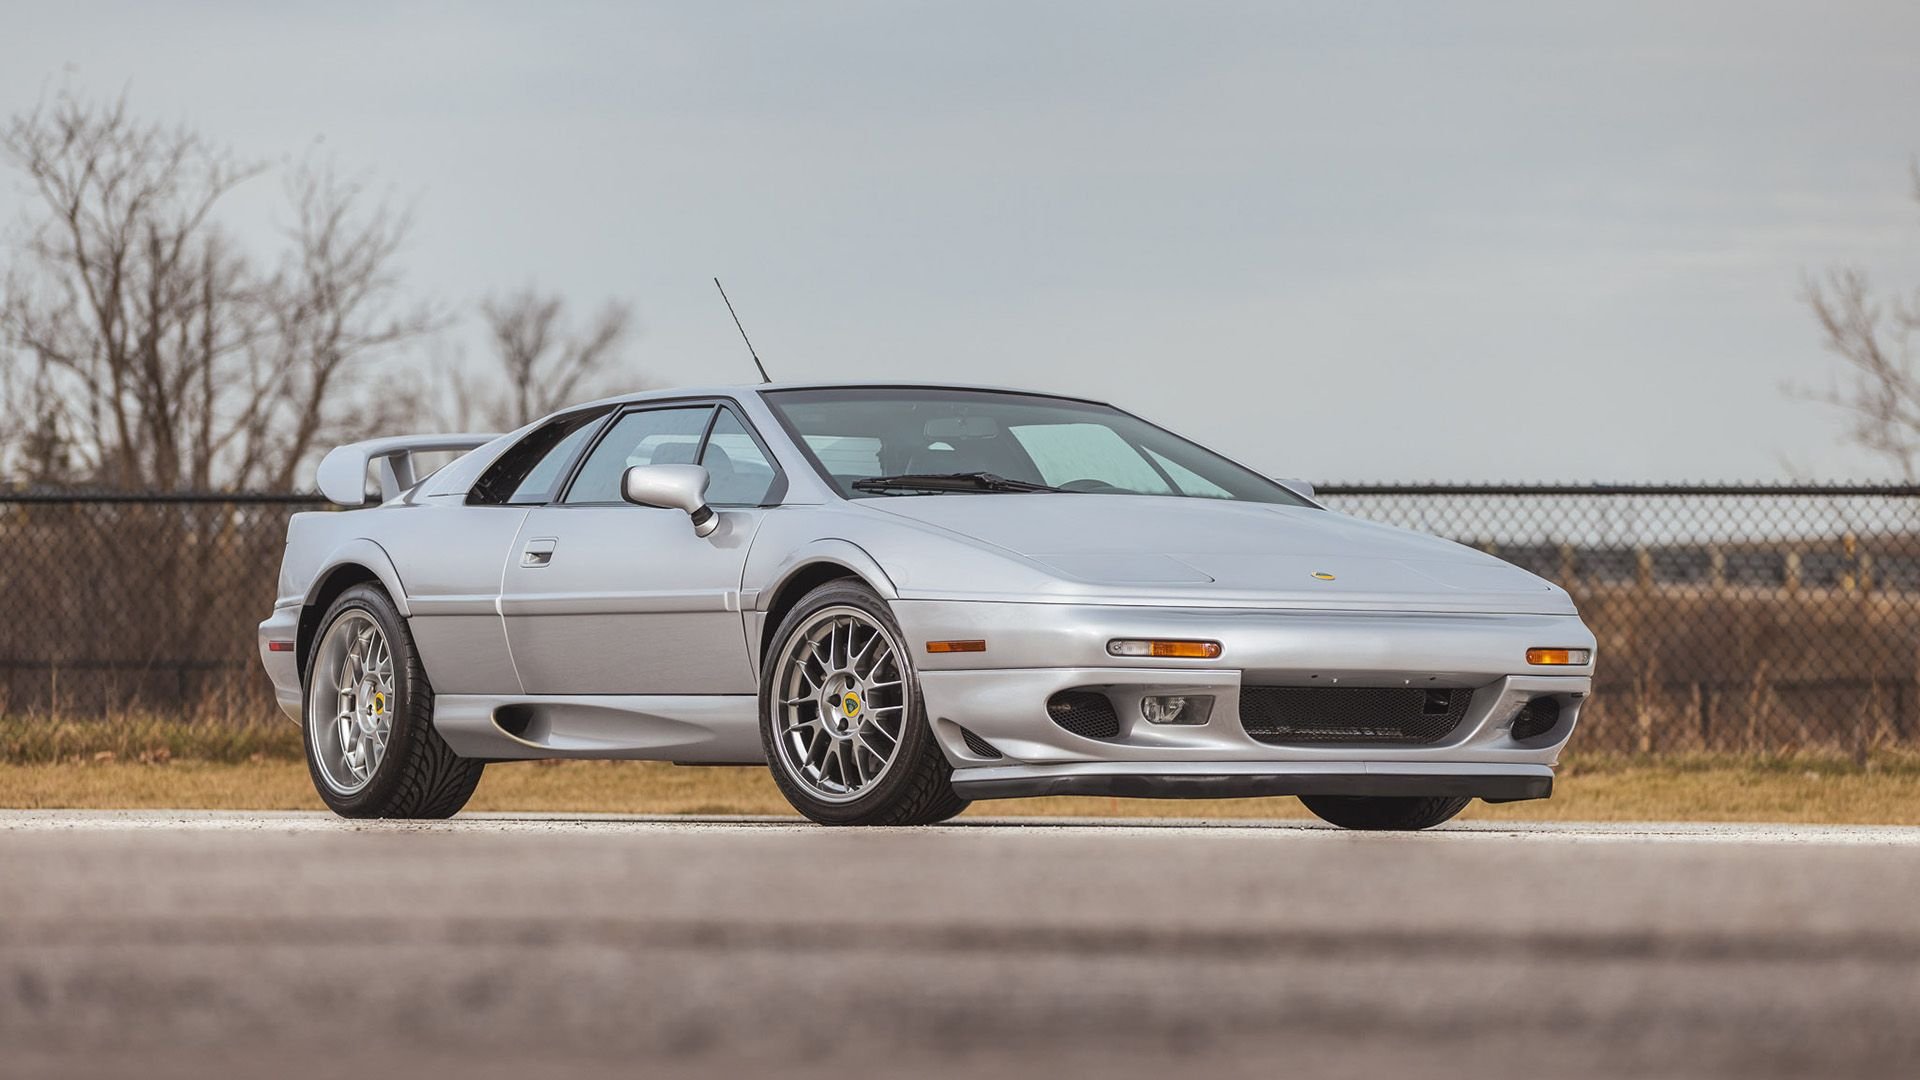 2002 Lotus Esprit V8 25th Anniversary Edition | The Amelia Auction |  Collector Car Auctions | Broad Arrow Auctions